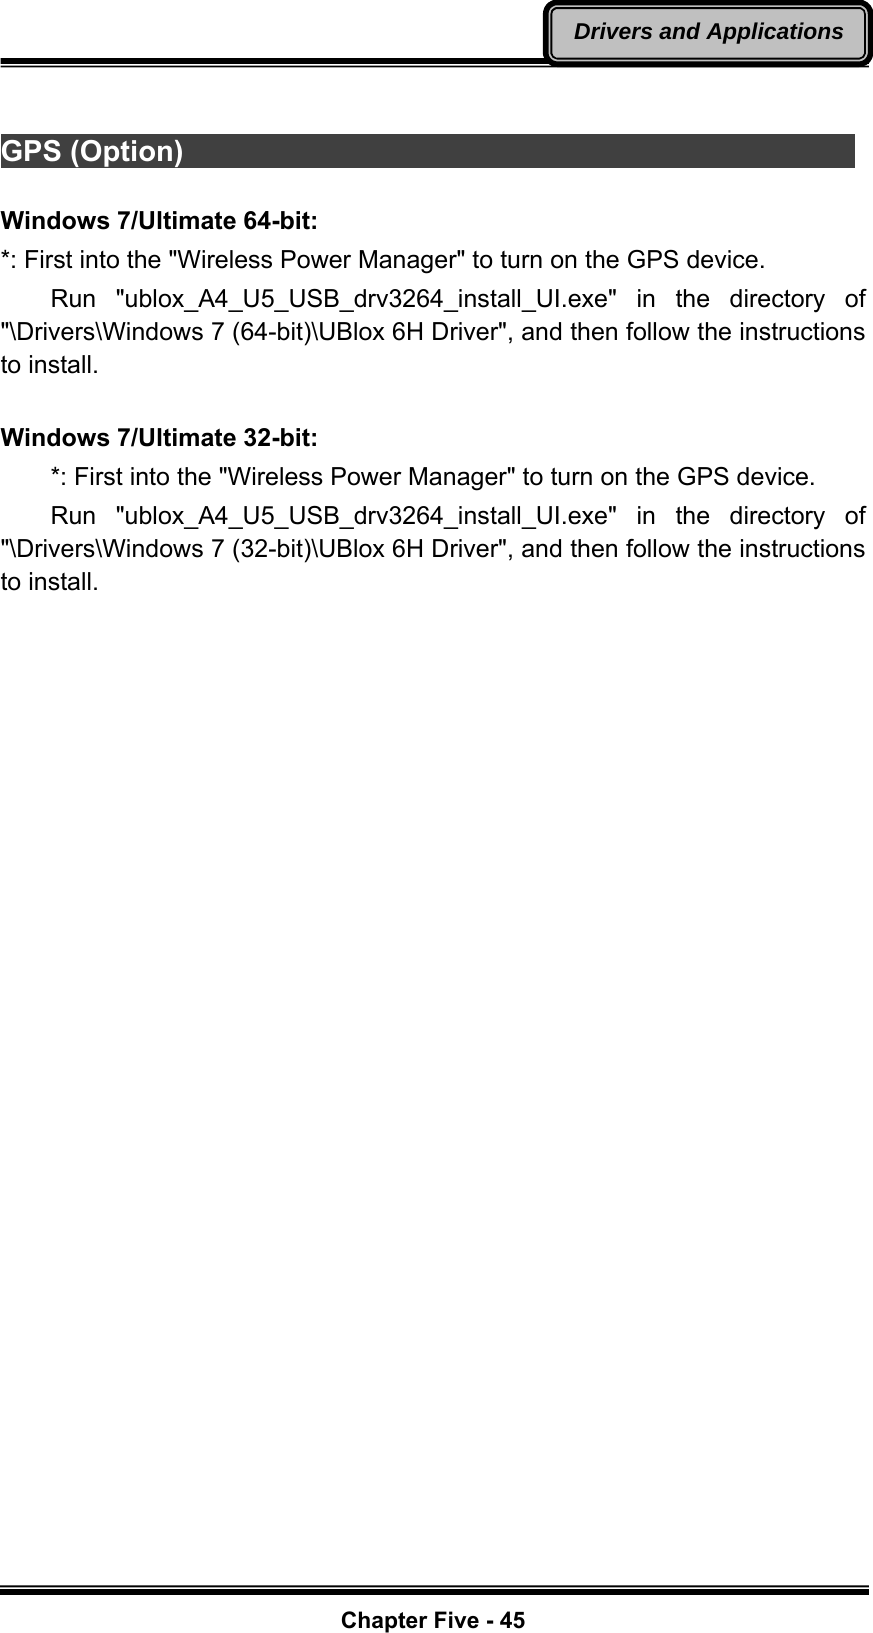   Chapter Five - 45Drivers and Applications GPS (Option)                                                Windows 7/Ultimate 64-bit: *: First into the &quot;Wireless Power Manager&quot; to turn on the GPS device.     Run  &quot;ublox_A4_U5_USB_drv3264_install_UI.exe&quot; in the directory of &quot;\Drivers\Windows 7 (64-bit)\UBlox 6H Driver&quot;, and then follow the instructions to install.  Windows 7/Ultimate 32-bit:         *: First into the &quot;Wireless Power Manager&quot; to turn on the GPS device.     Run  &quot;ublox_A4_U5_USB_drv3264_install_UI.exe&quot; in the directory of &quot;\Drivers\Windows 7 (32-bit)\UBlox 6H Driver&quot;, and then follow the instructions to install. 